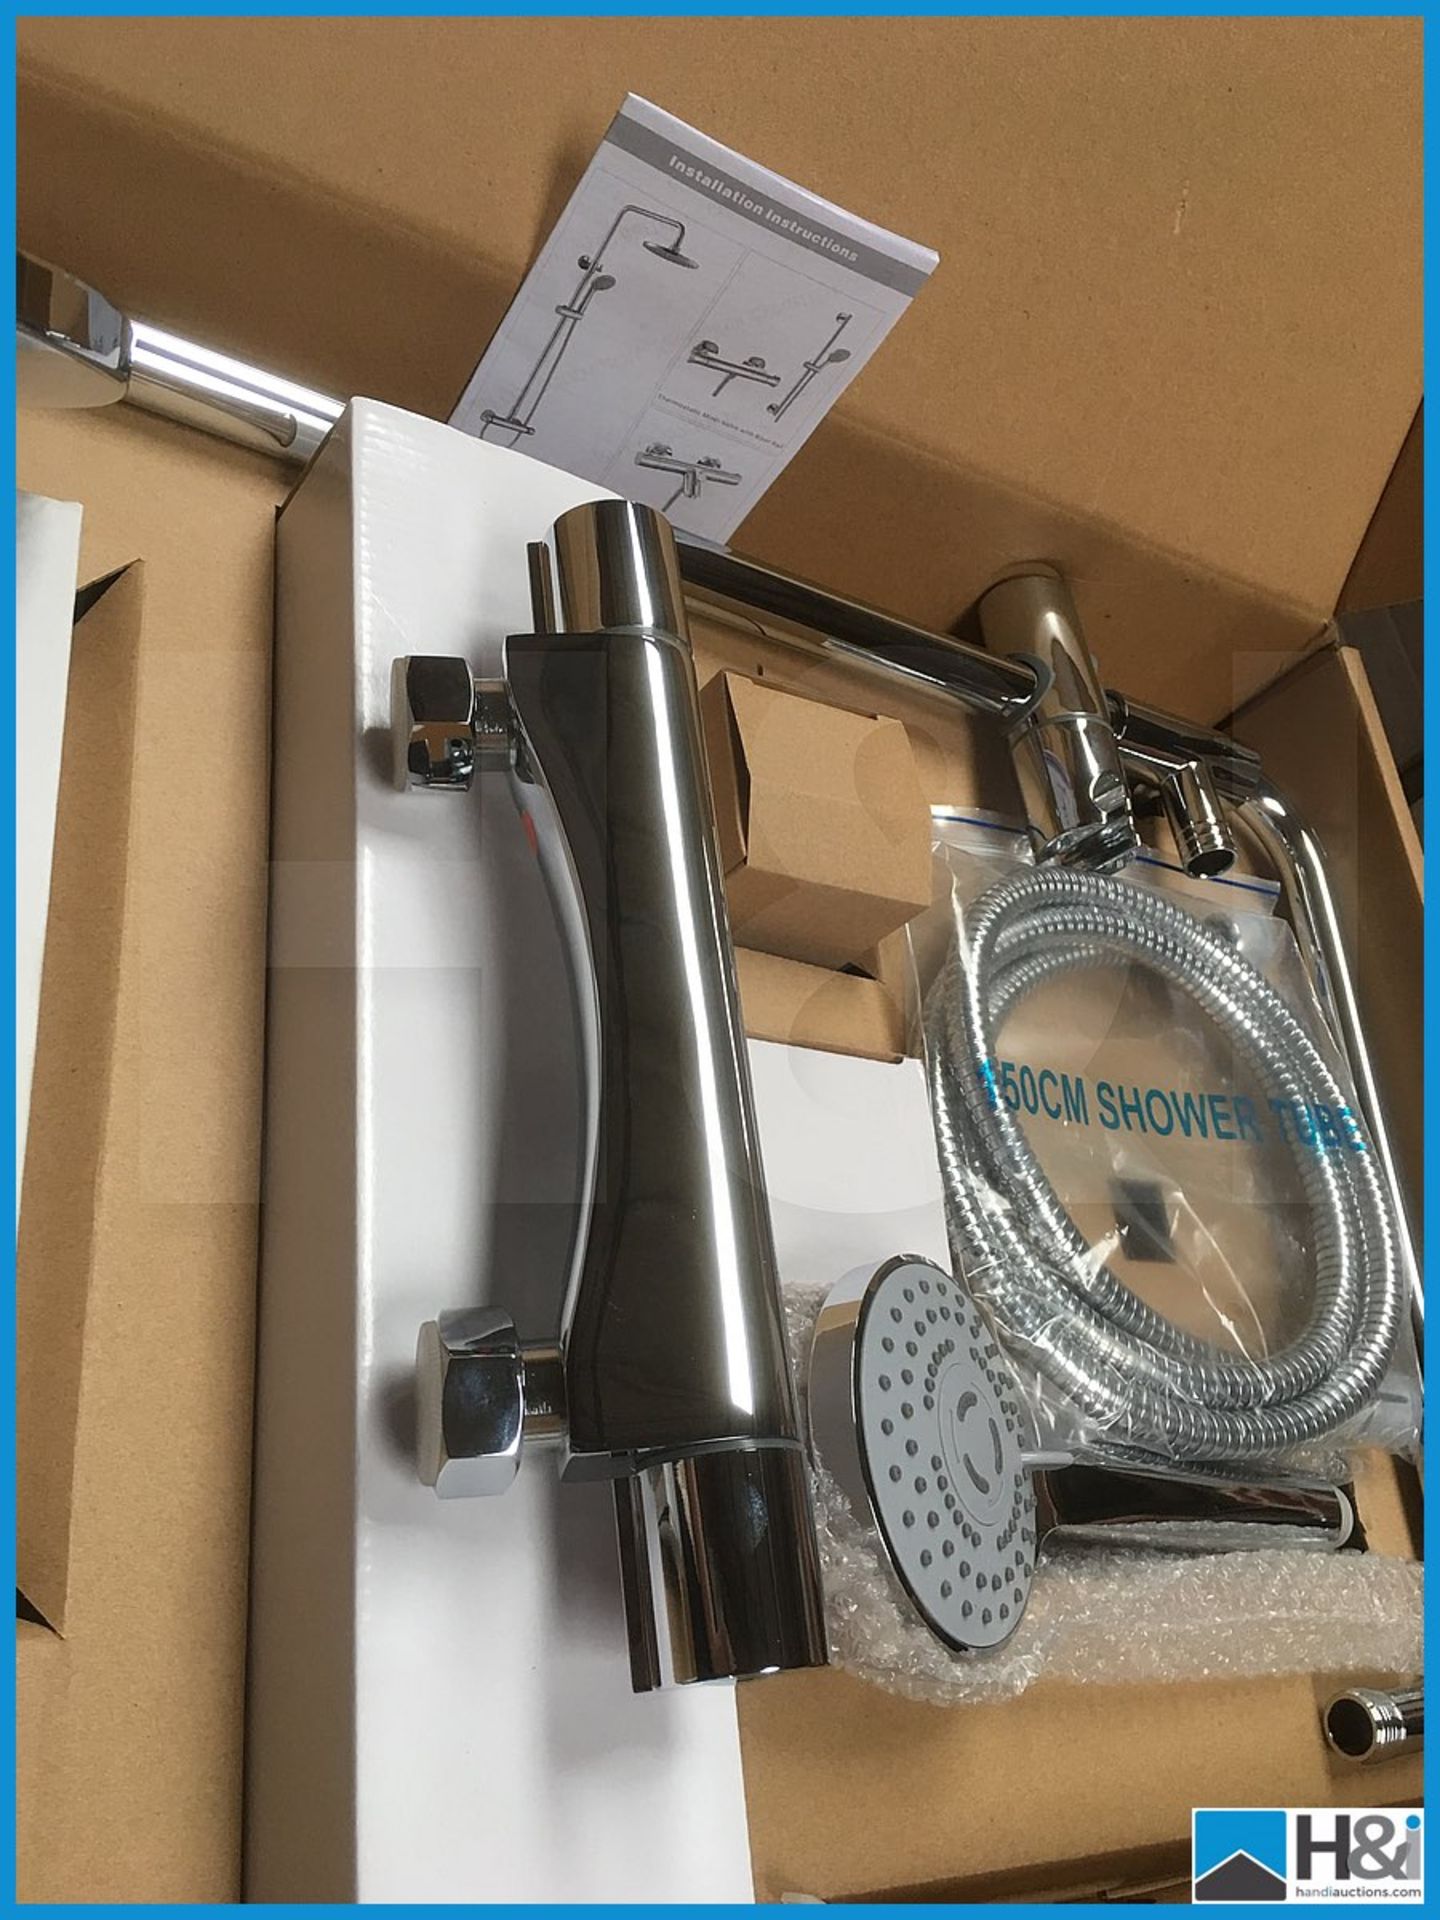 Stunning polished chrome round head thermostatic shower kit comprising riser rail, thermostatic bar, - Image 2 of 3